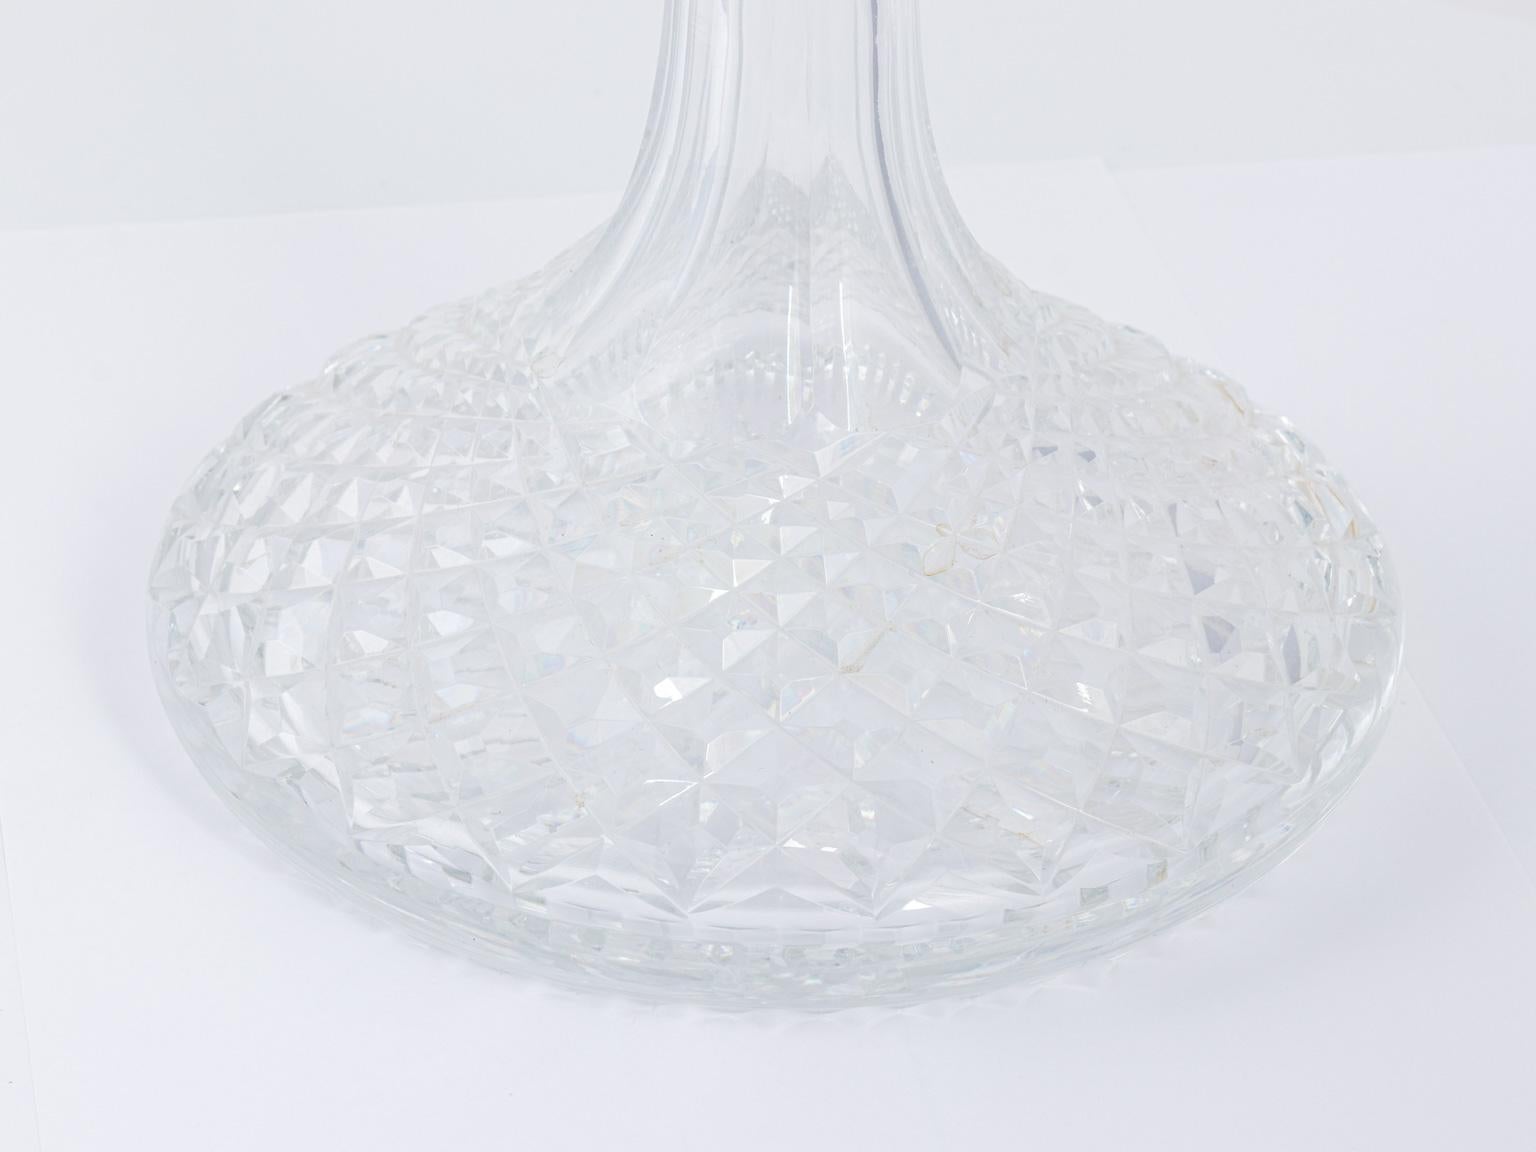 Pair of Cut Crystal Decanters 1